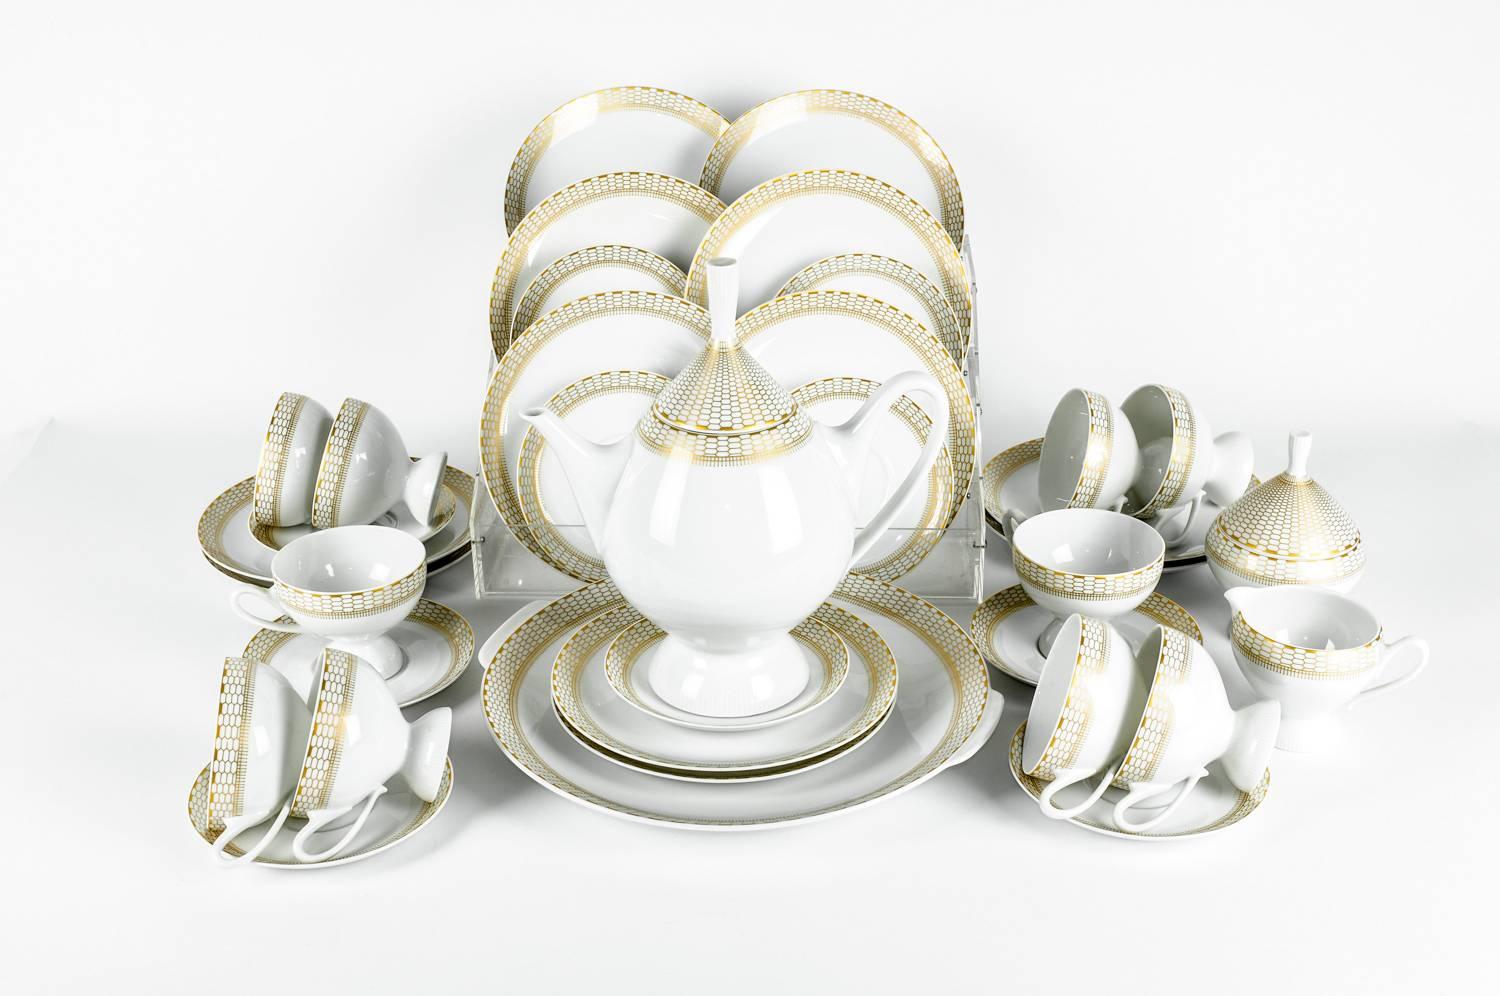 Exquisitely beautiful Art Deco German Porcelain Luncheon tea or coffee service for ten people. Every piece is in excellent vintage condition. The set include large round tray. Tea or coffee pot. One covered sugar container. One milk or creamer